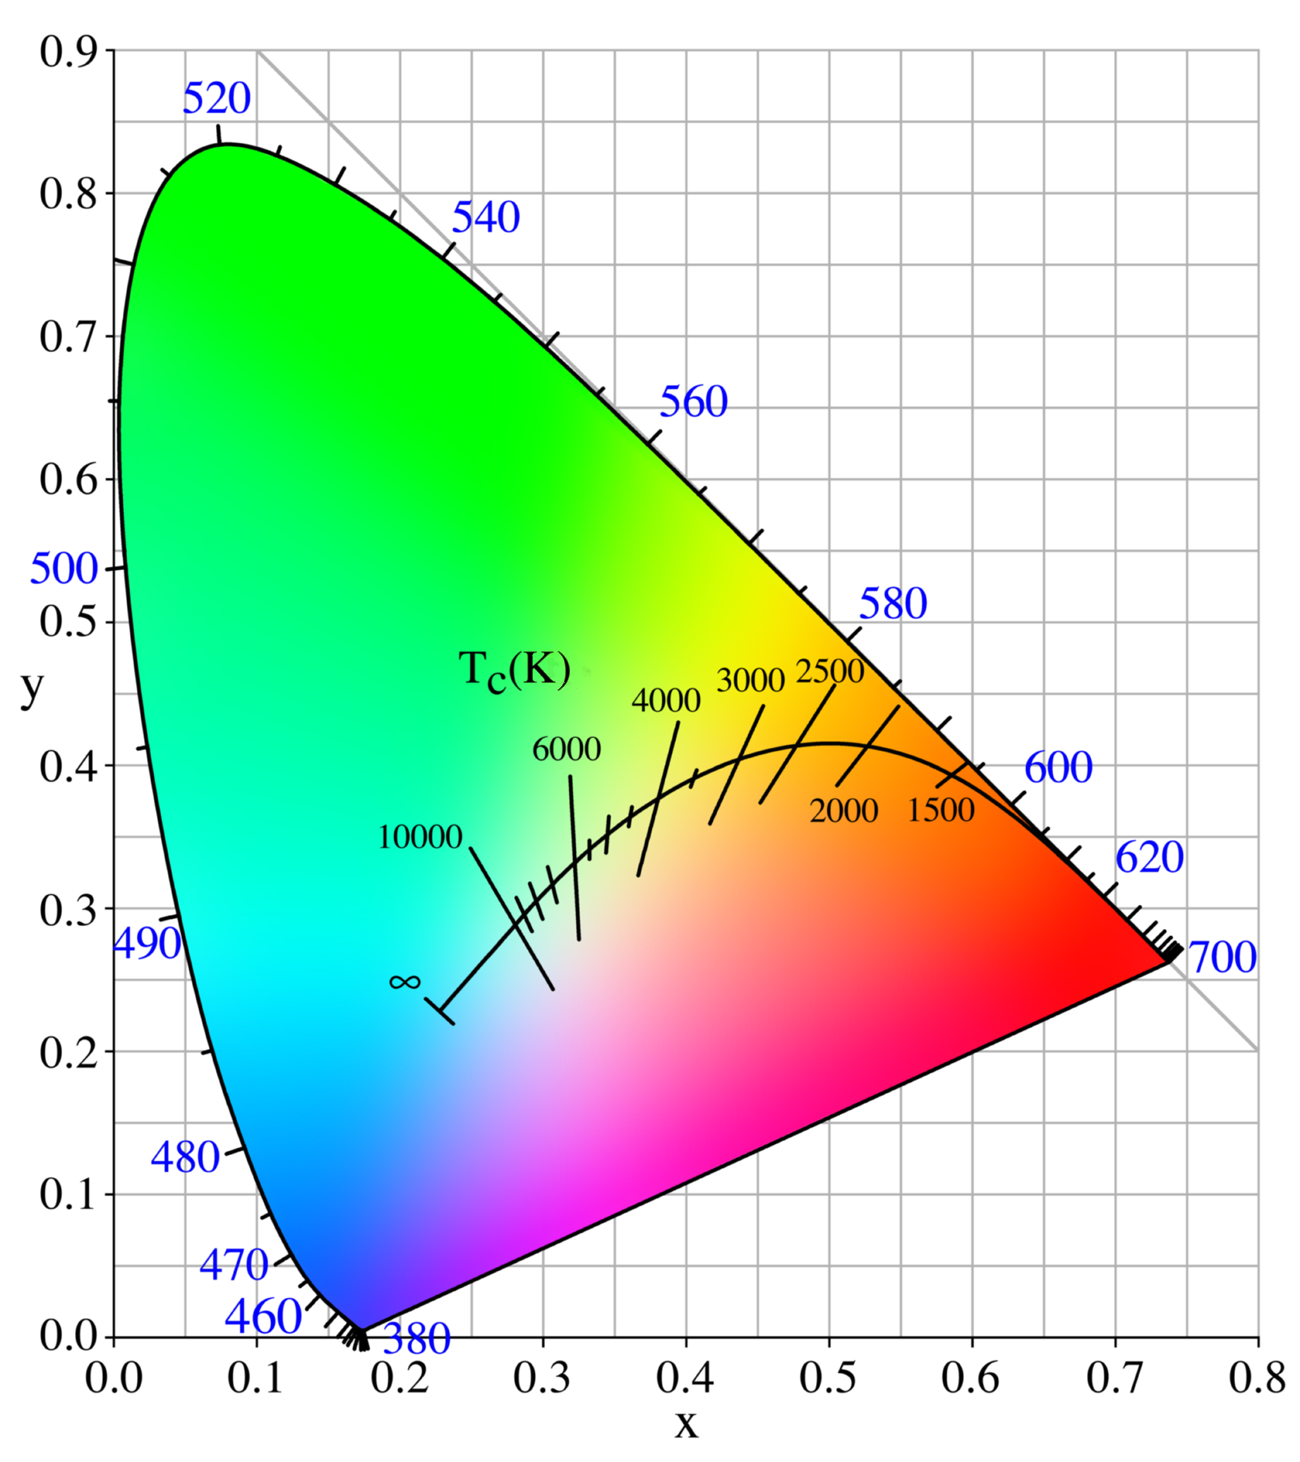 CIE1931_xy_chromaticity_space_diagram.png|400